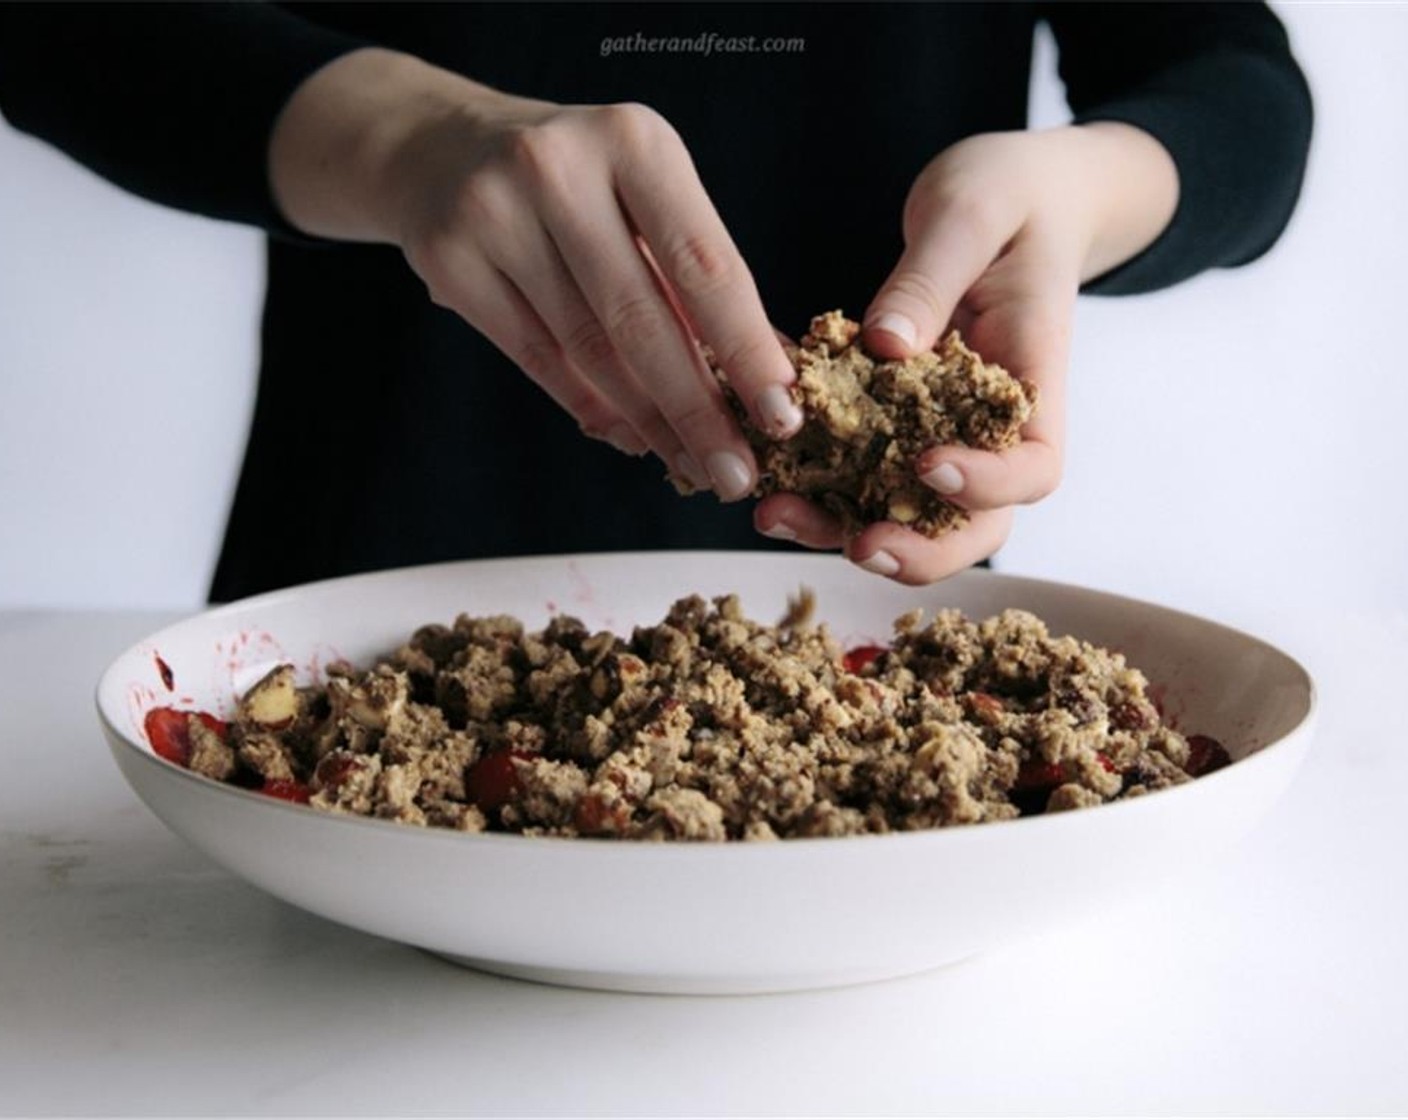 step 6 Place the berry mix into a baking dish then sprinkle the crumble mixture on top. Pop the dish into your preheated oven and bake for 30 minutes.